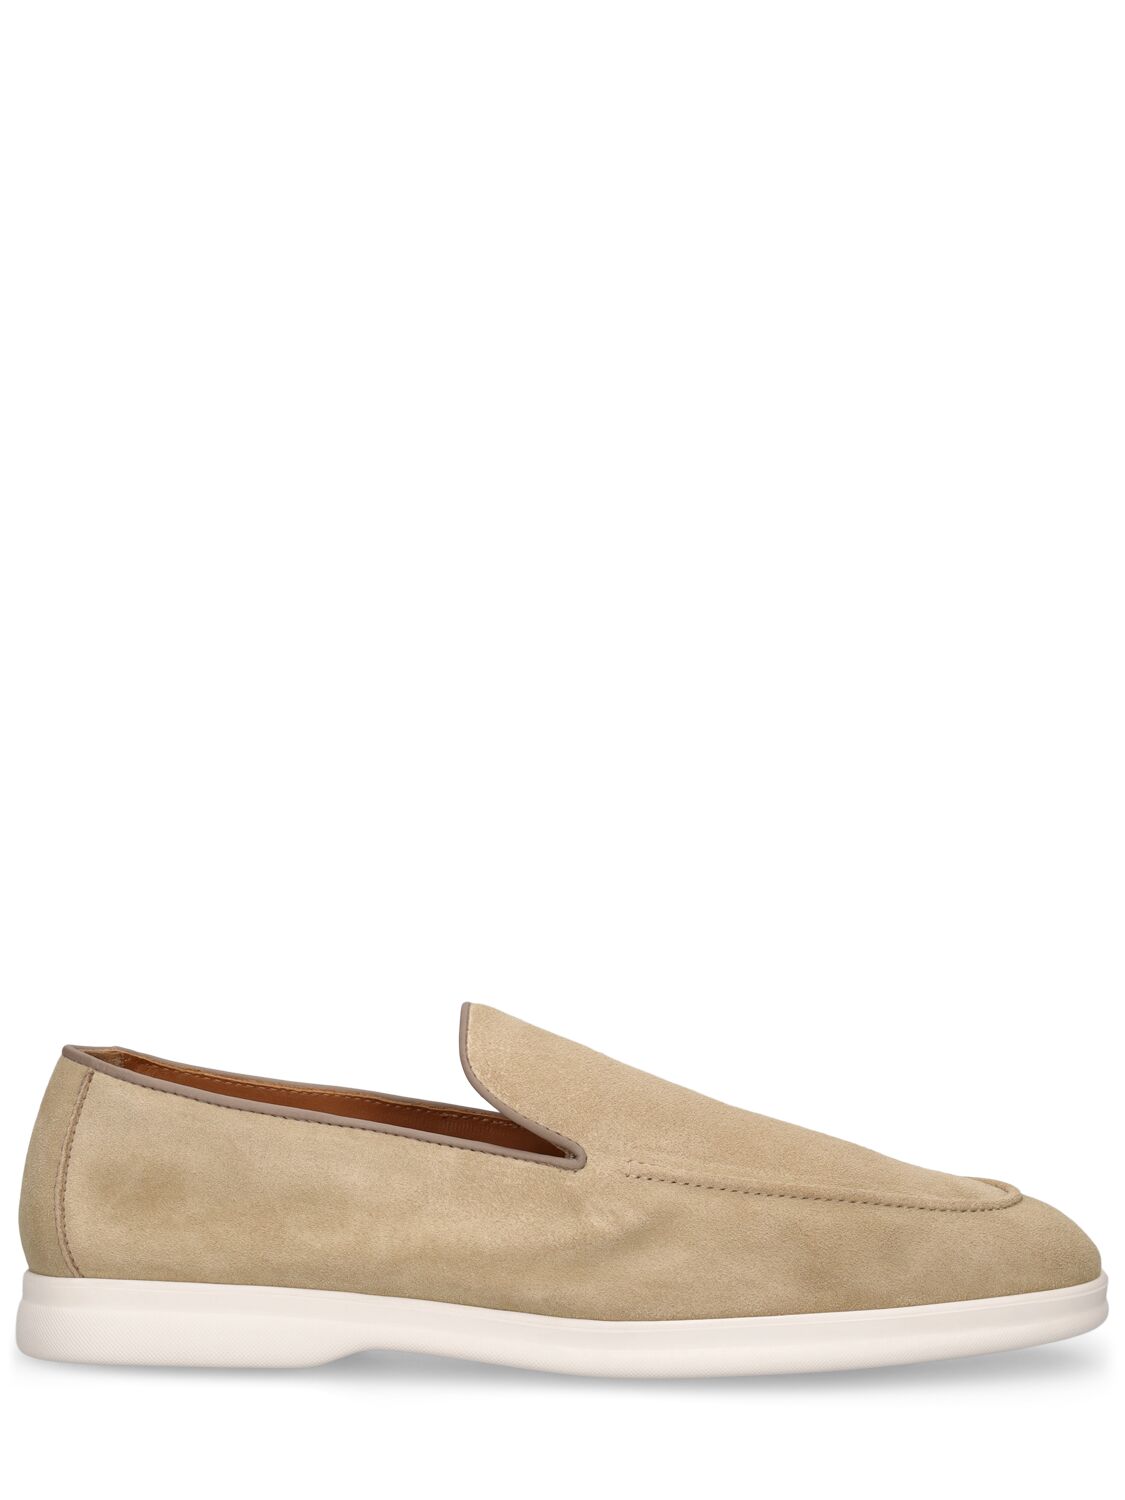 Doucal's Adler Suede Loafers In Sand